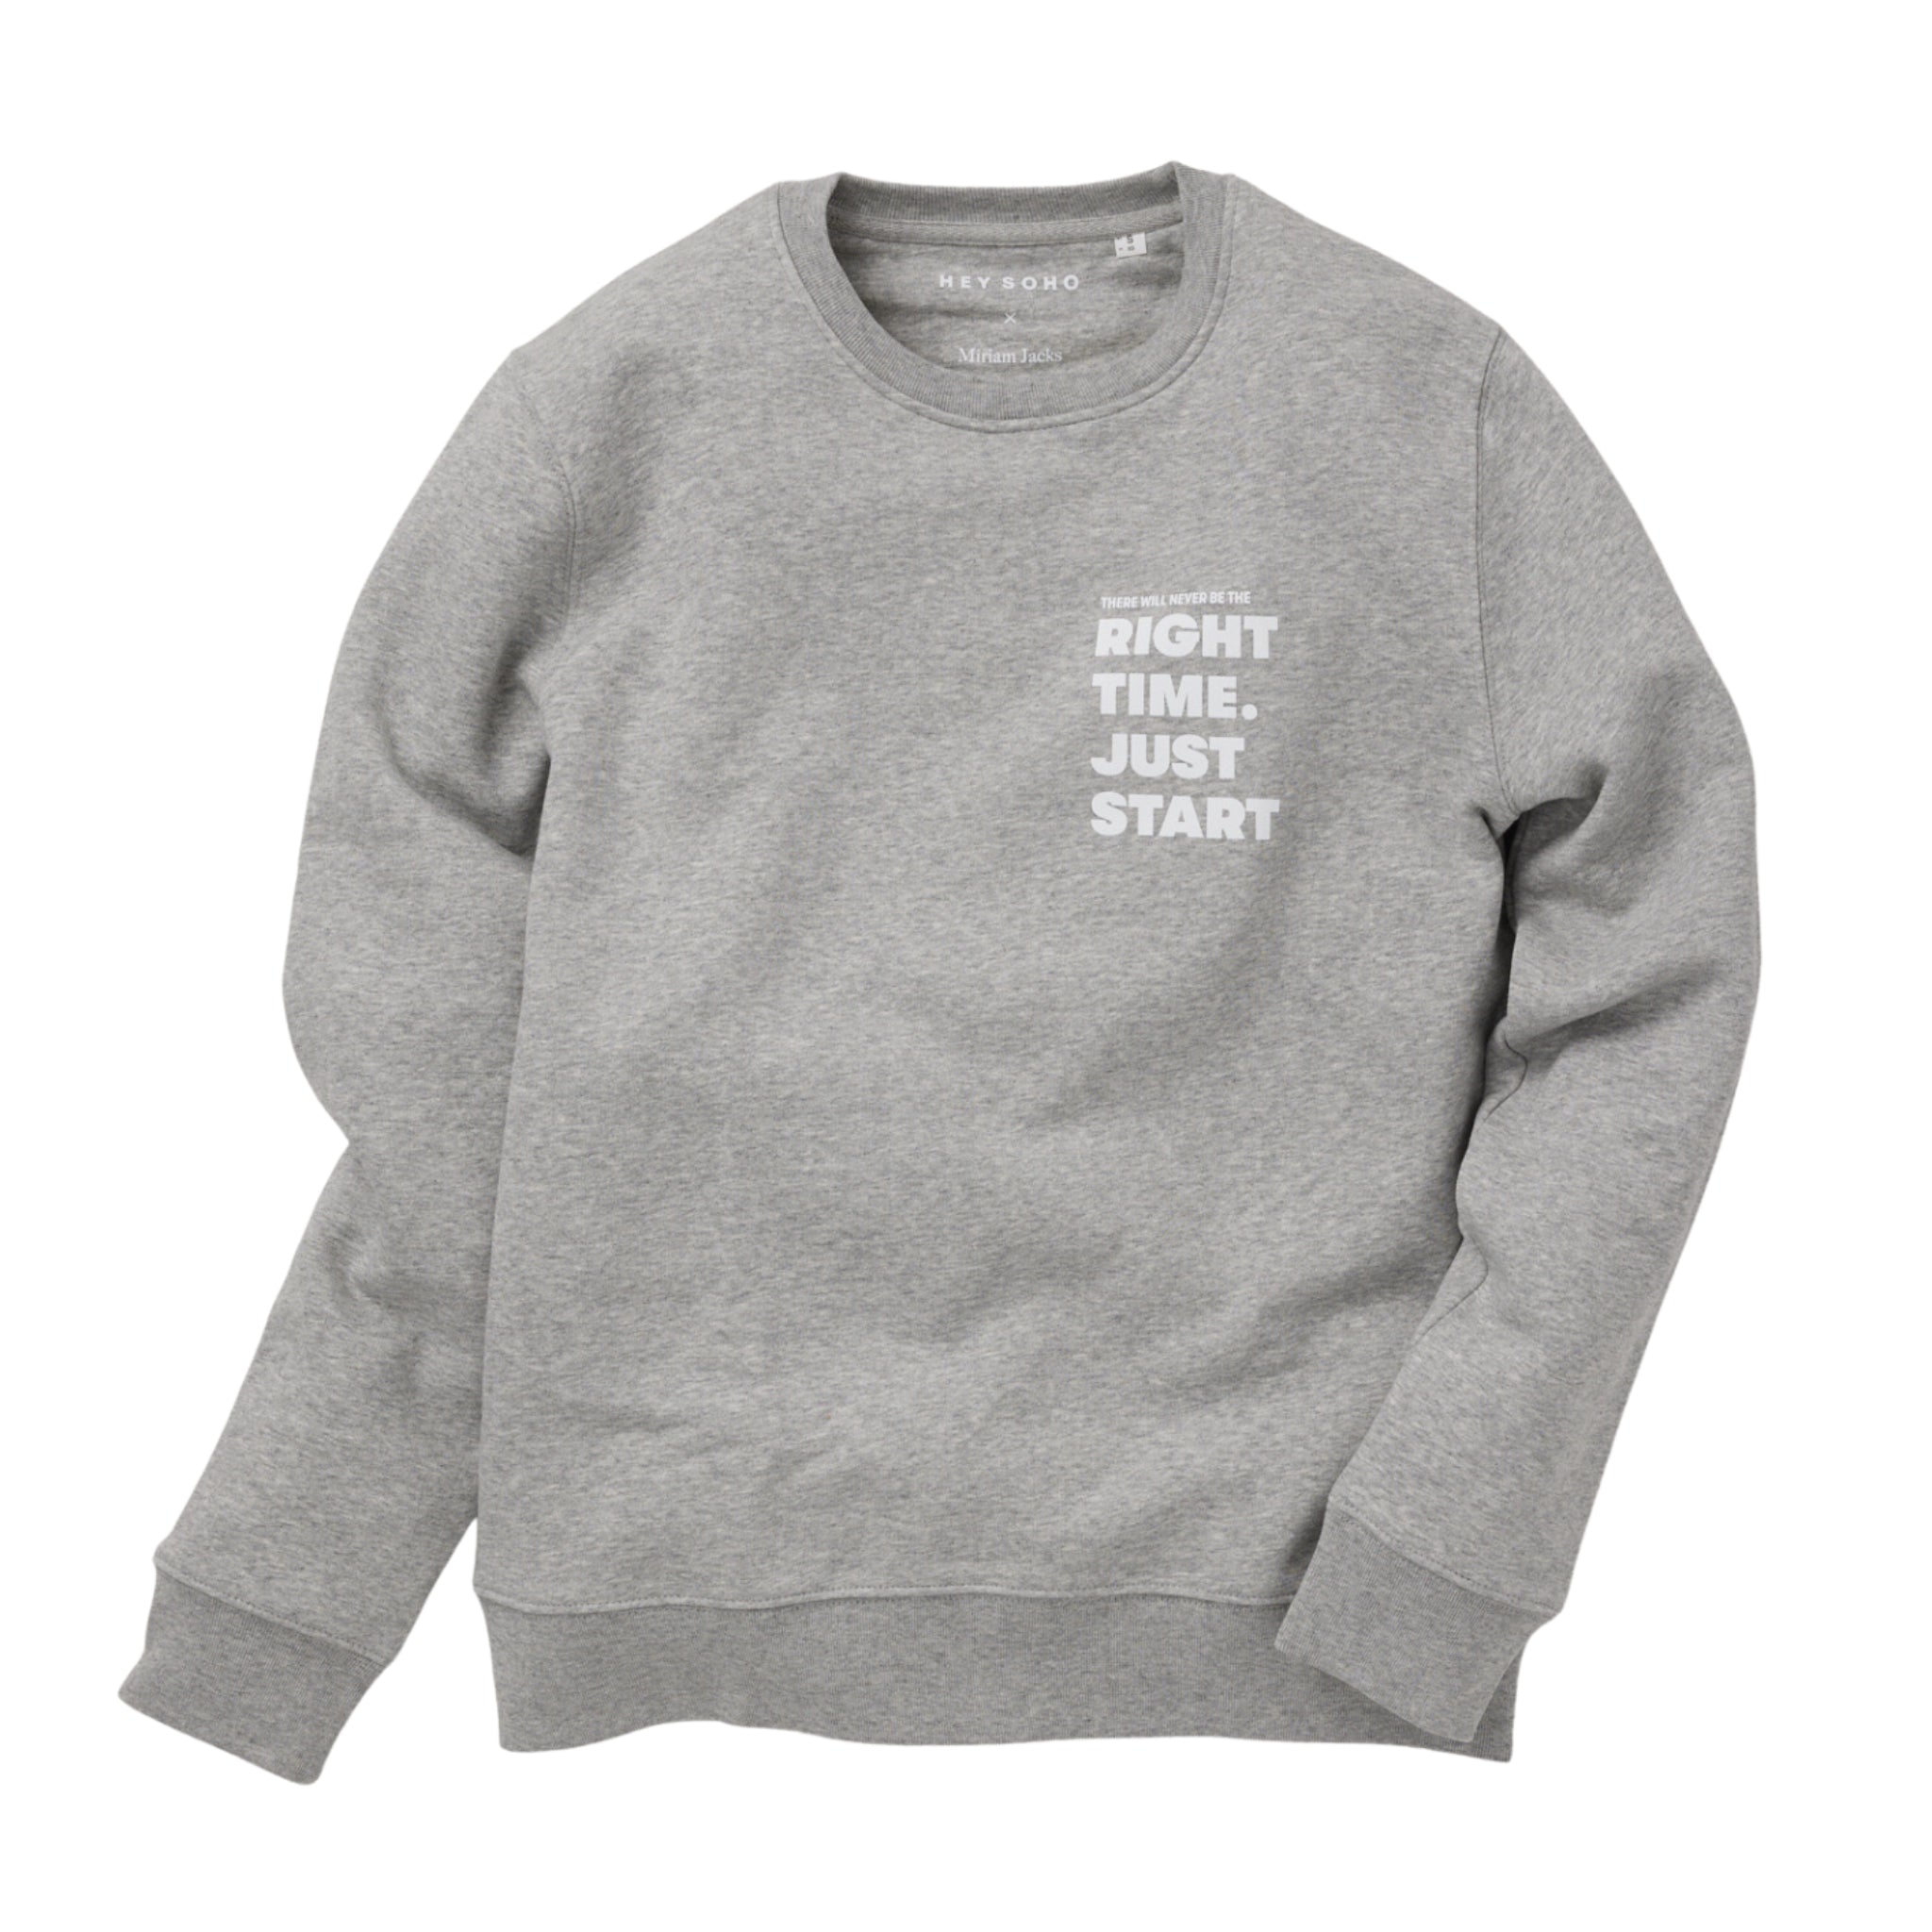 hey soho Sweater "Right Time Just Start"